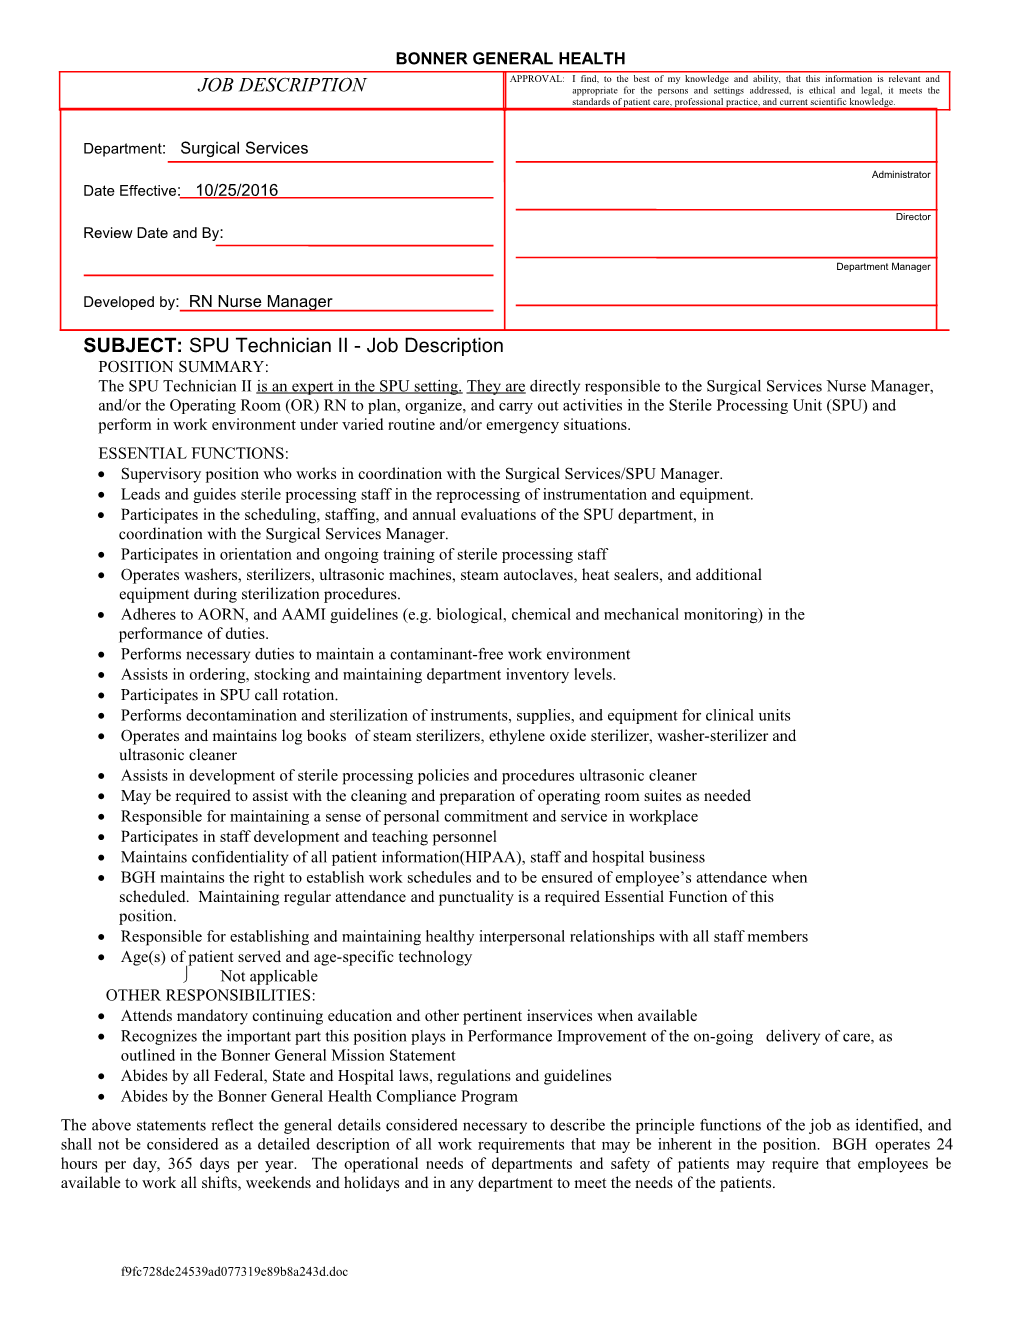 Policy/Procedure Continuation Sheet: Page 3